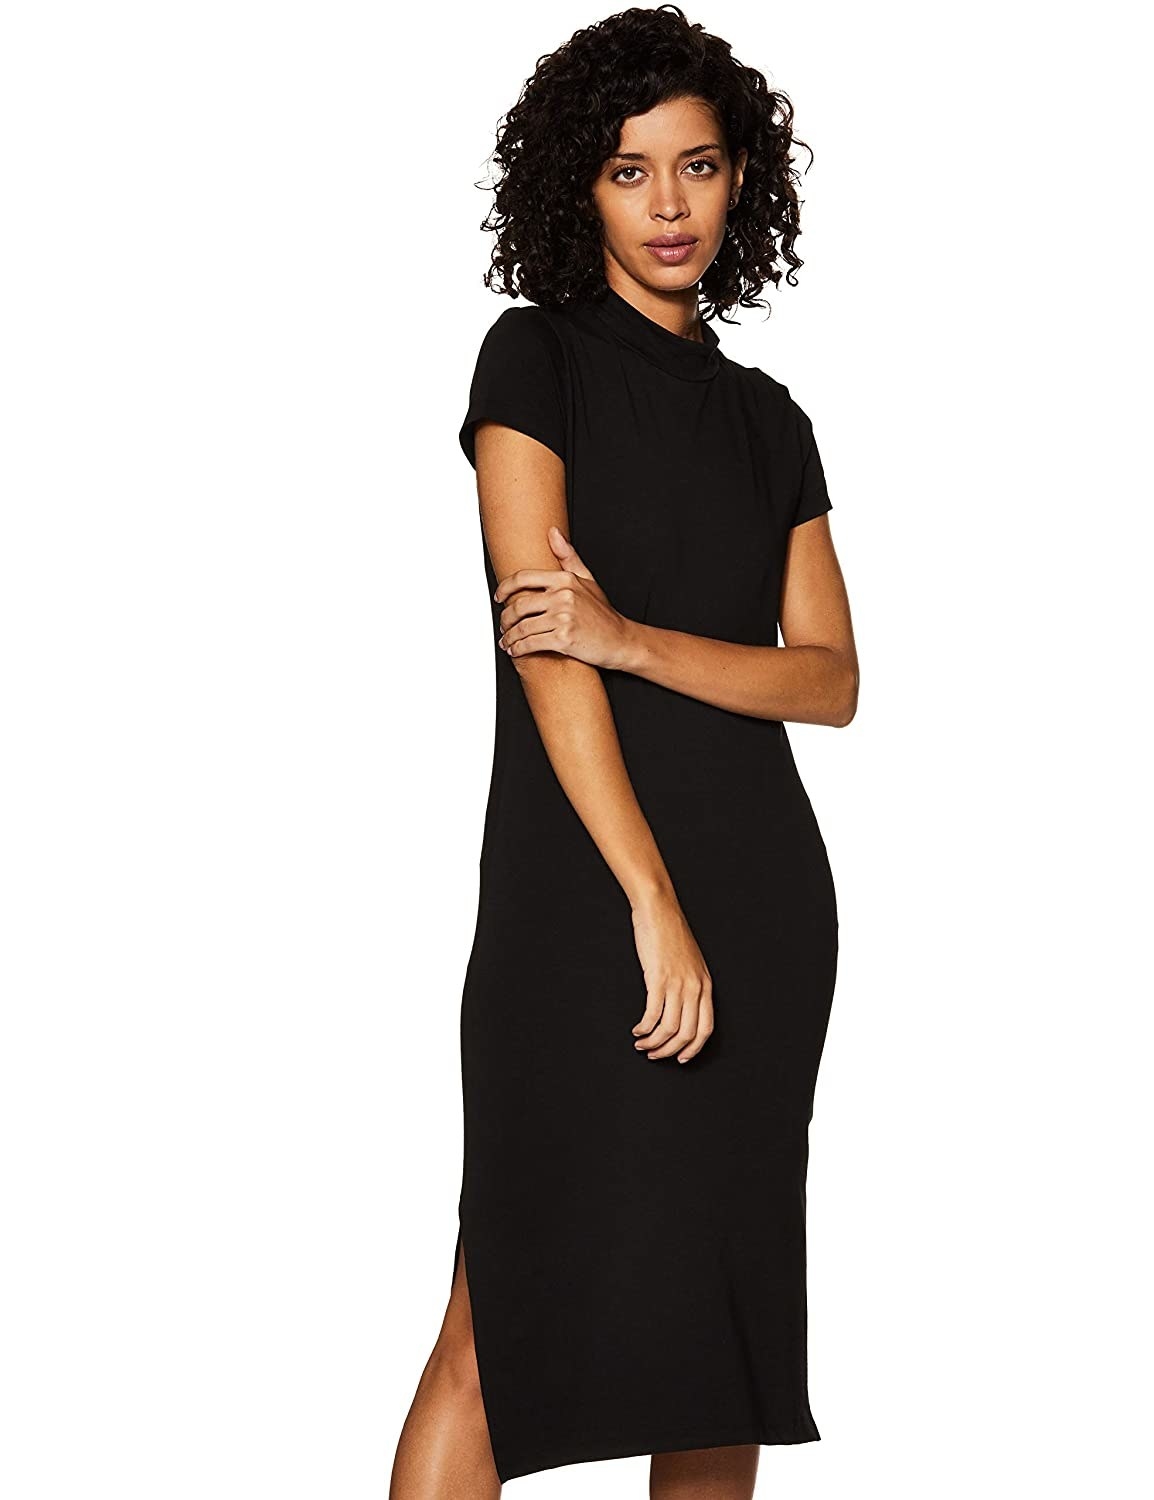 A black form-fitting dress with a slit near the leg